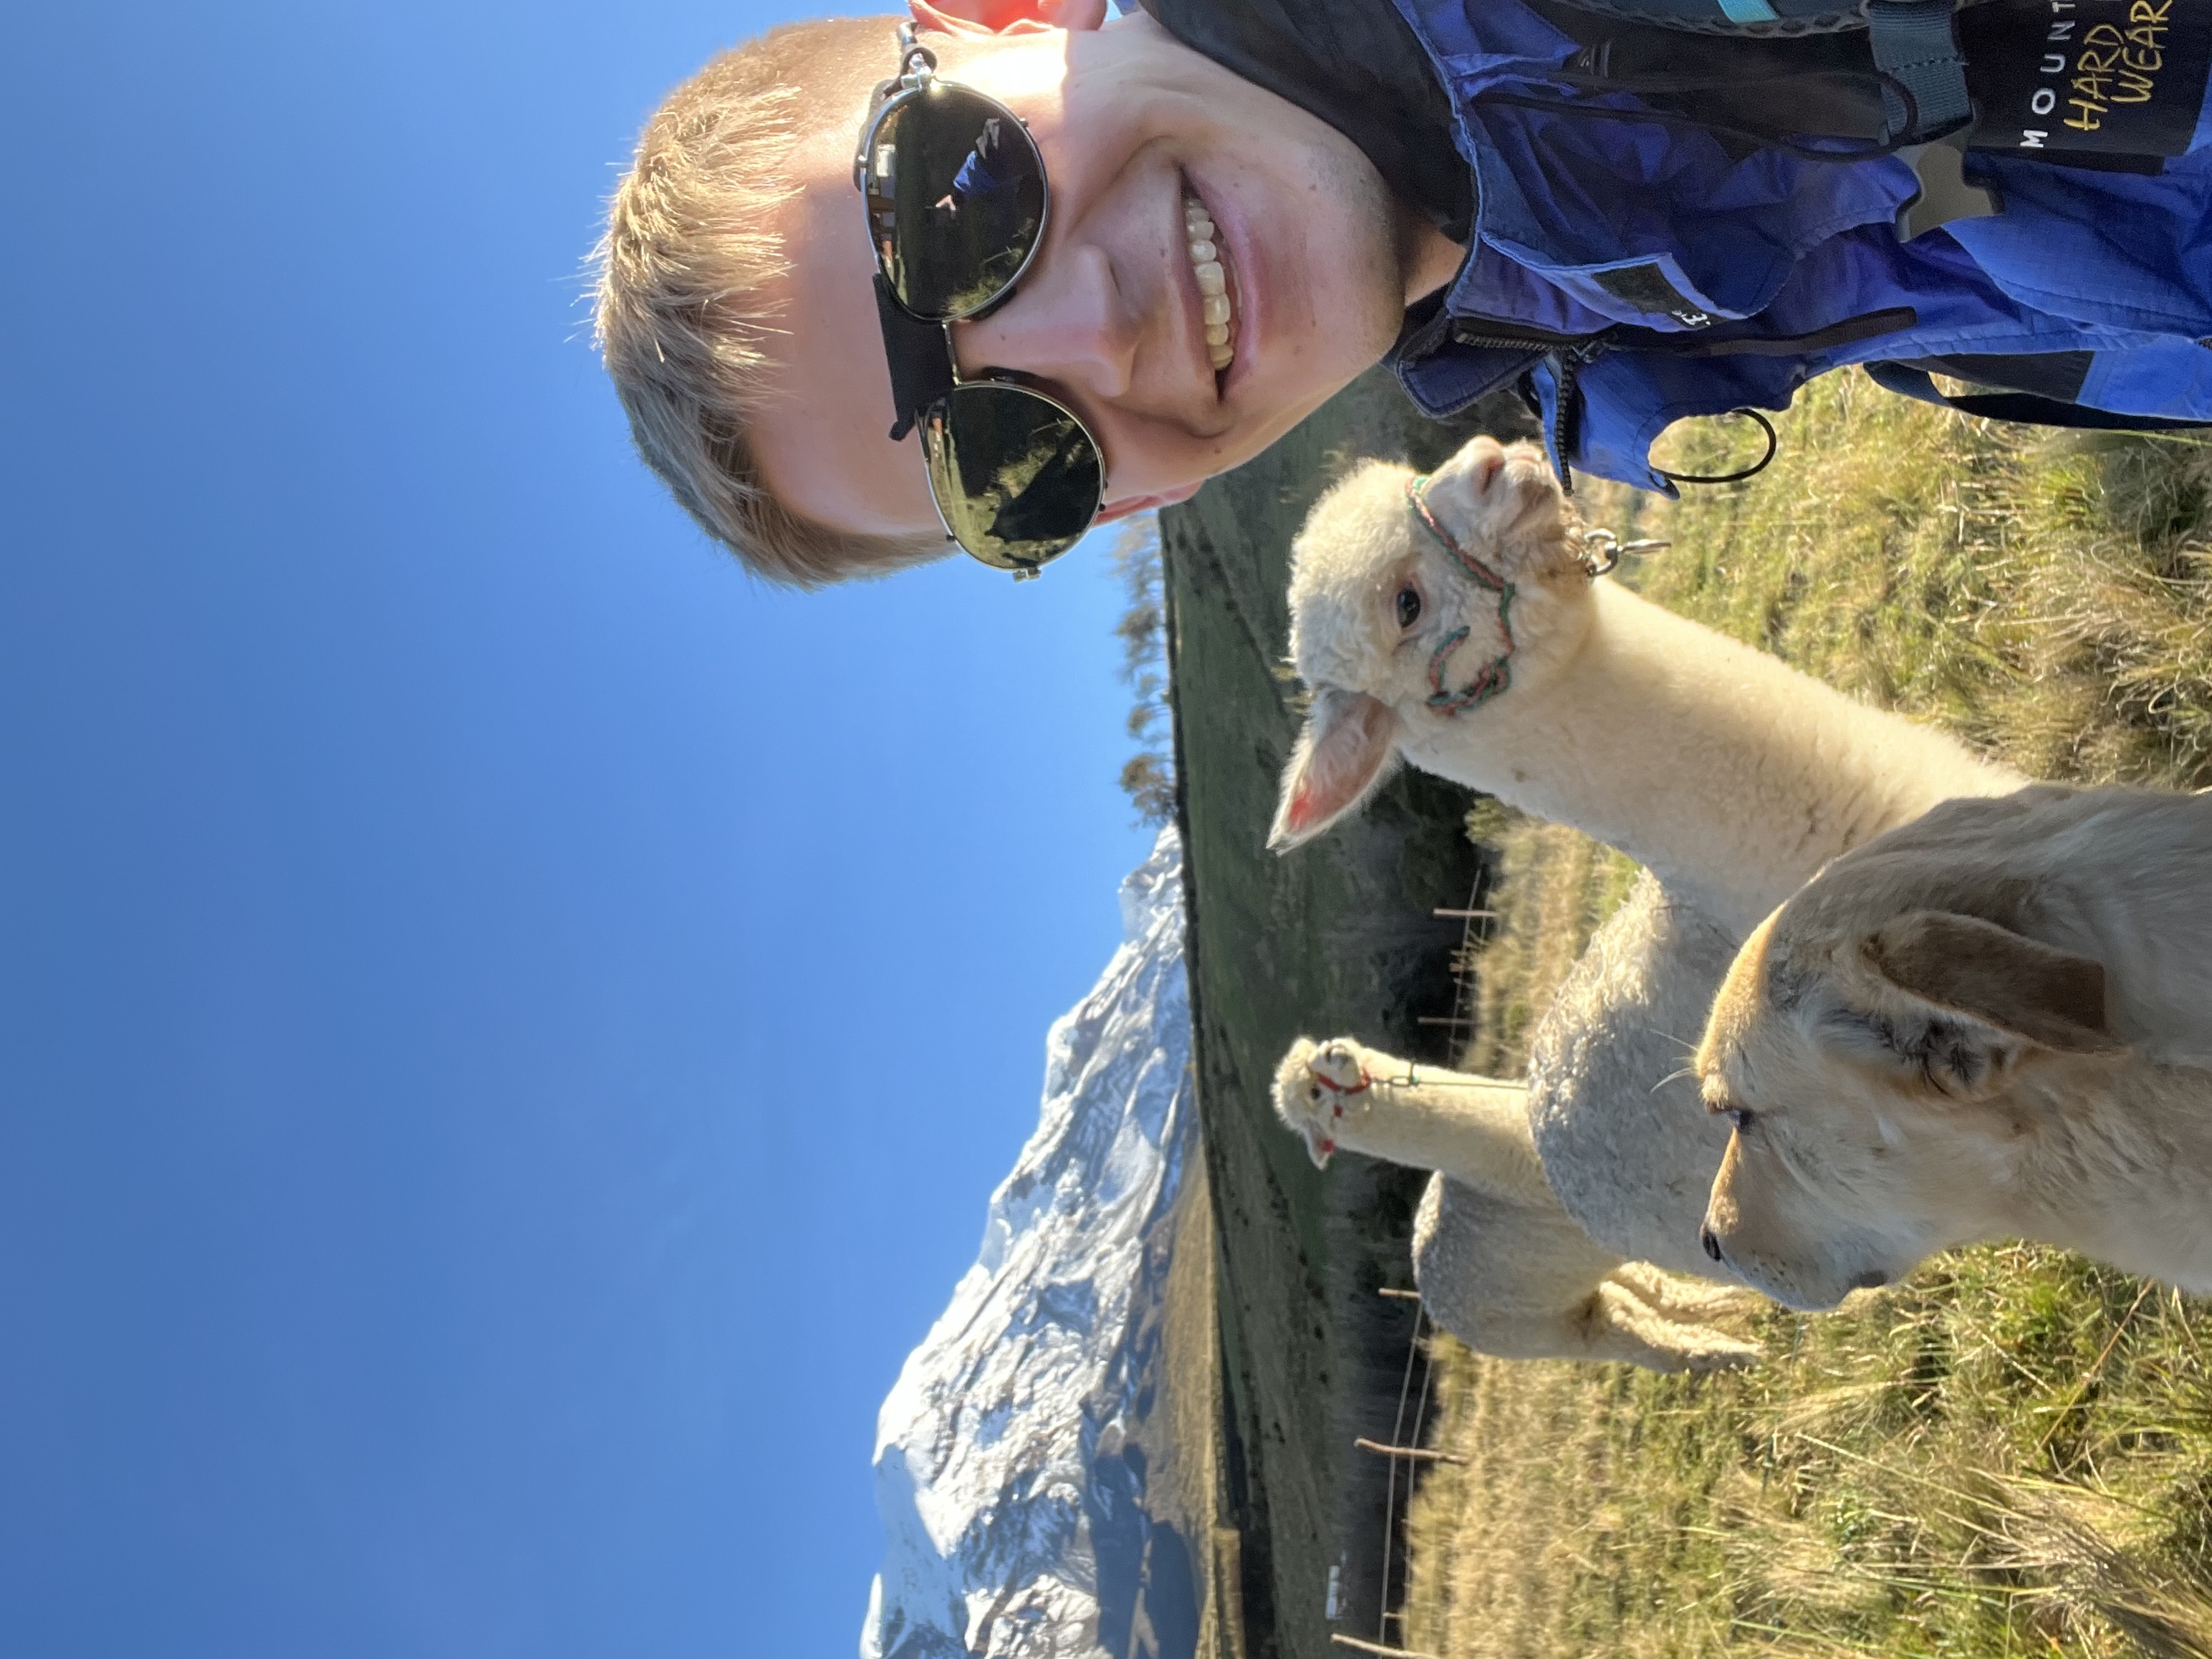 Two llamas, one dog, me, and Chimborazo from the base camp (3800m)